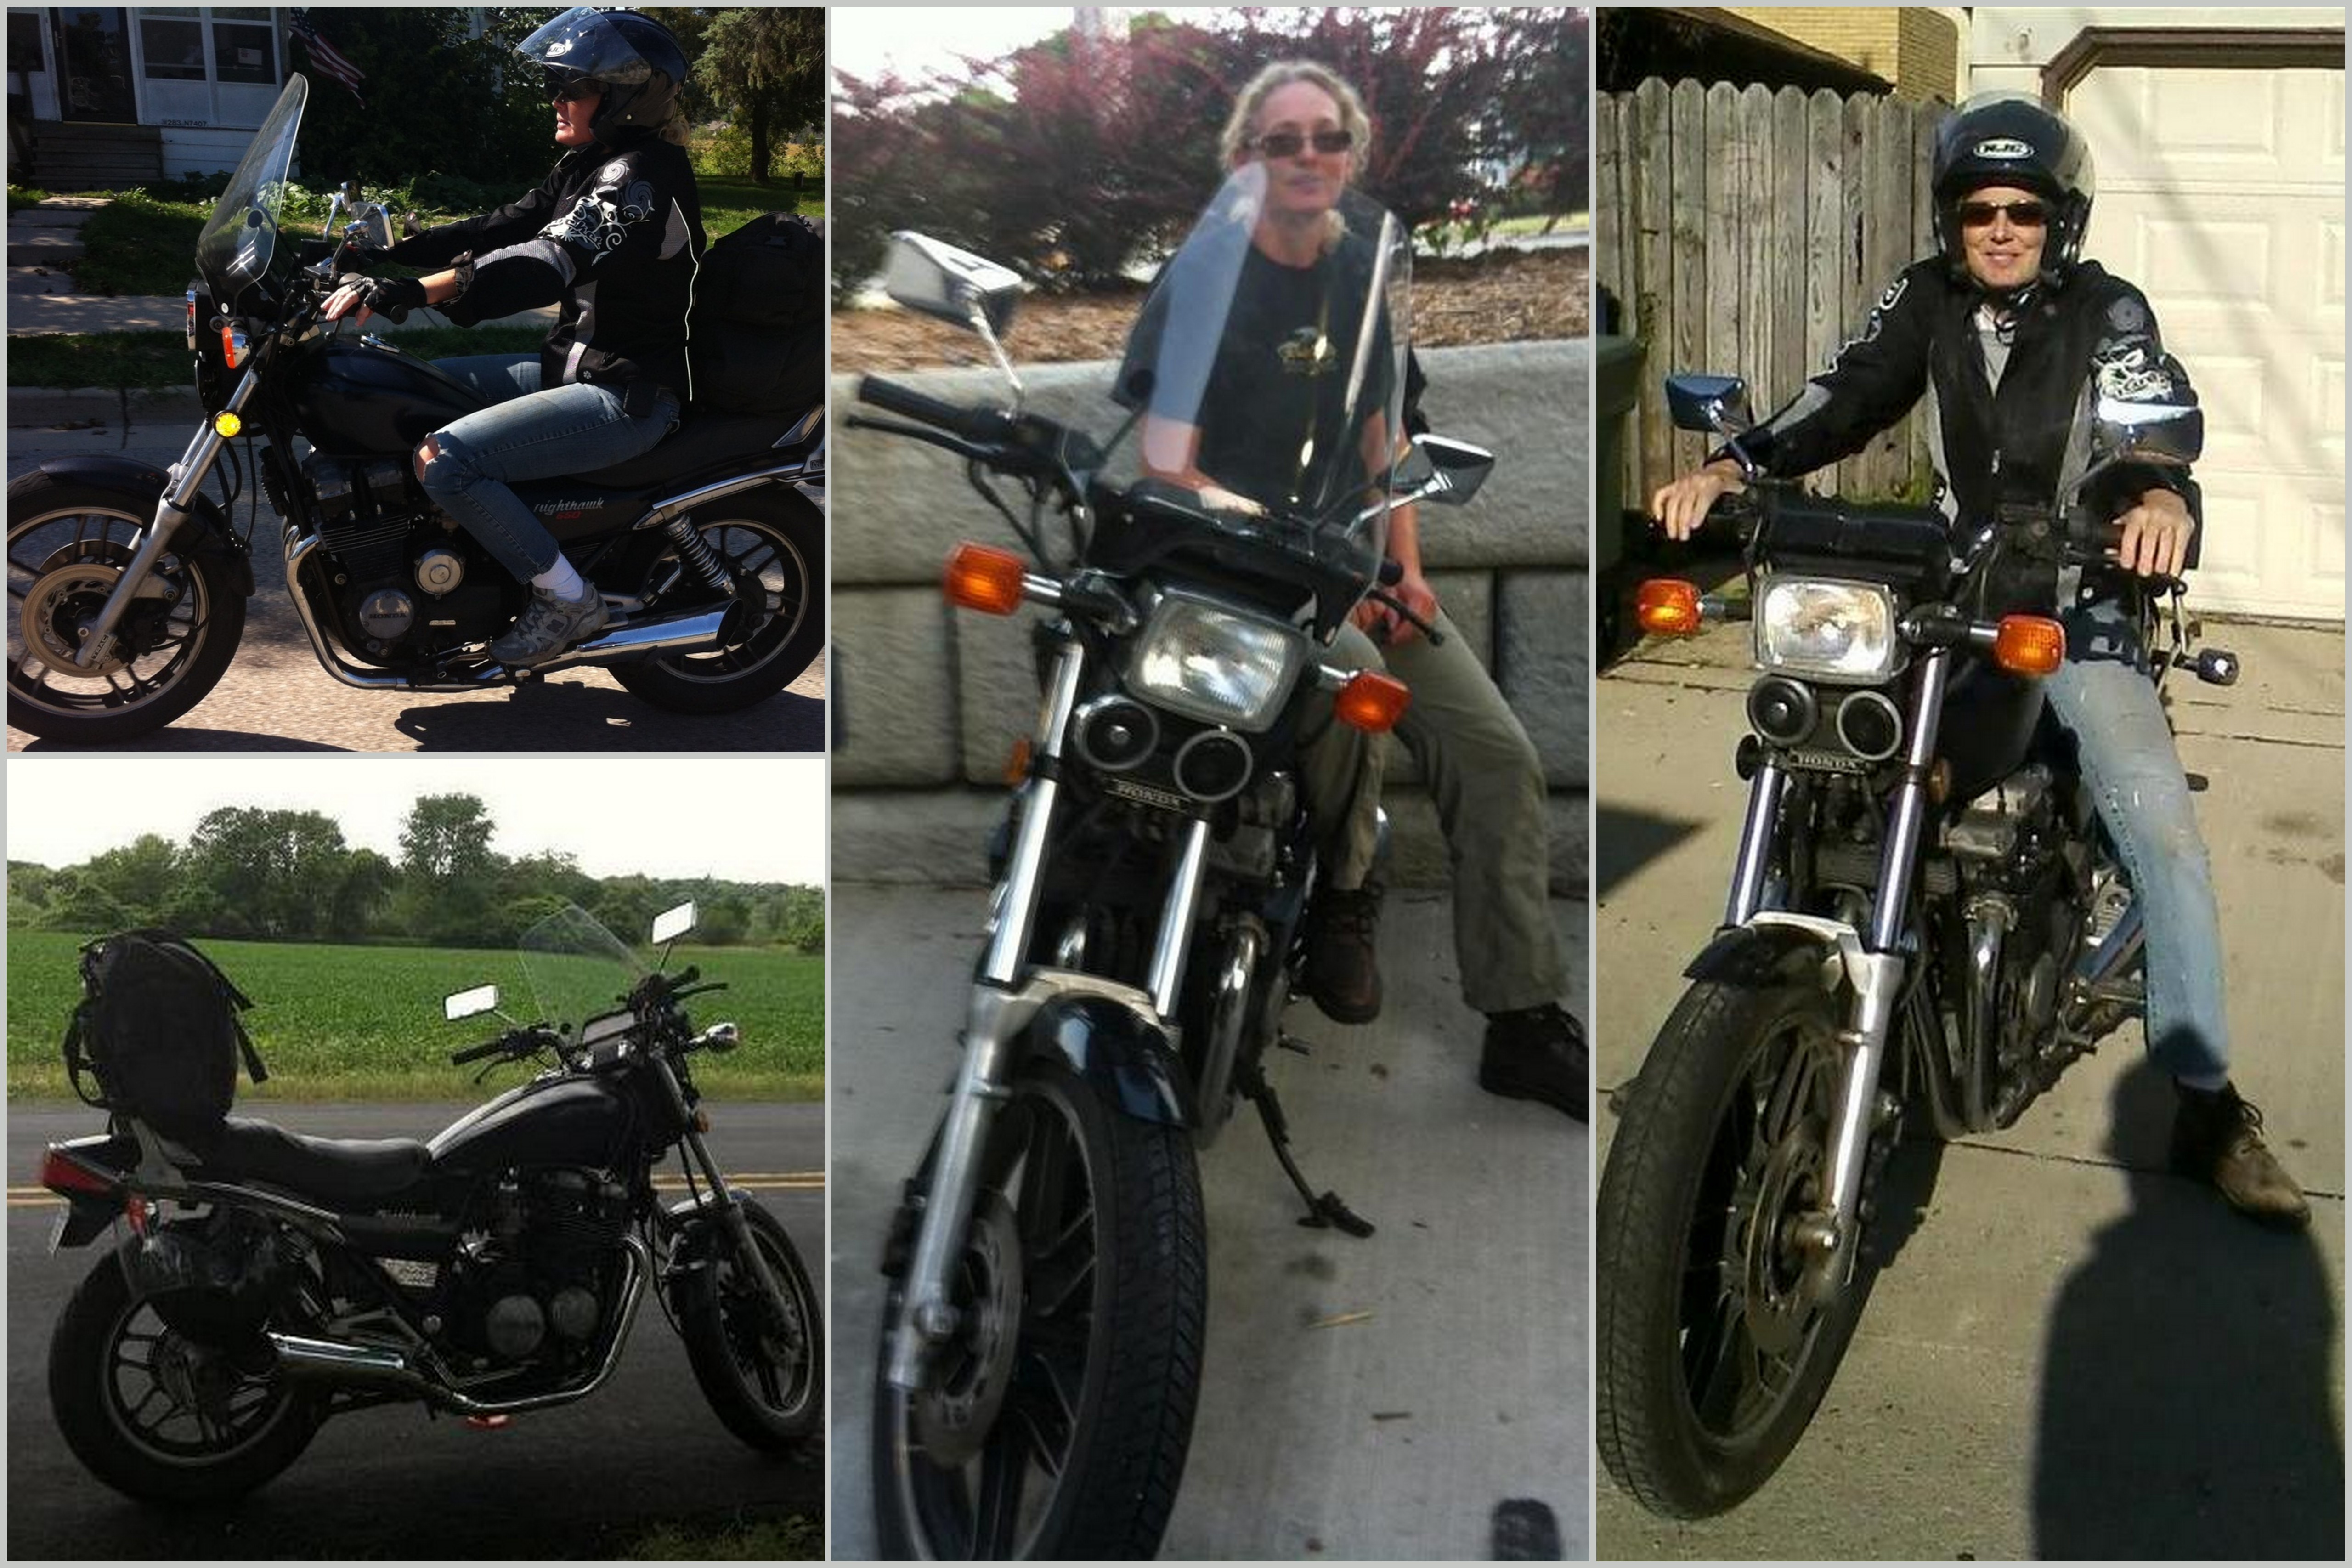 Profile of a Female Motorcyclist Meet Sue - on her motorcycle